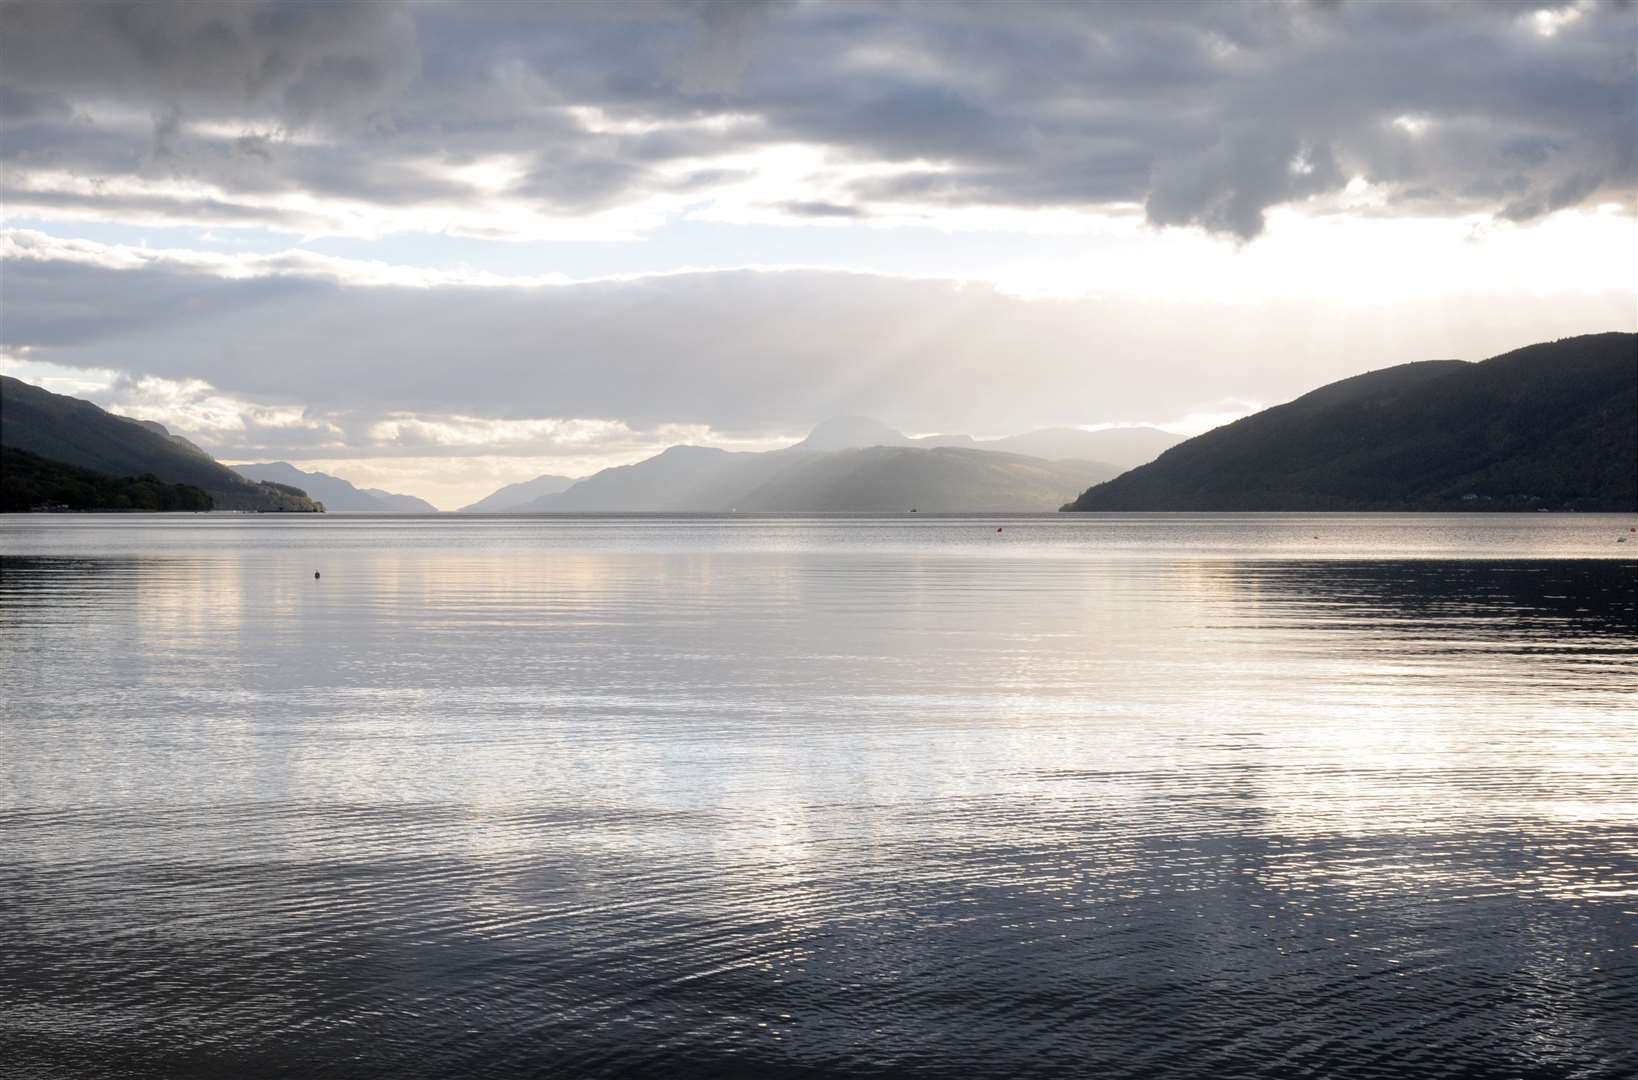 The view from Dores beach.